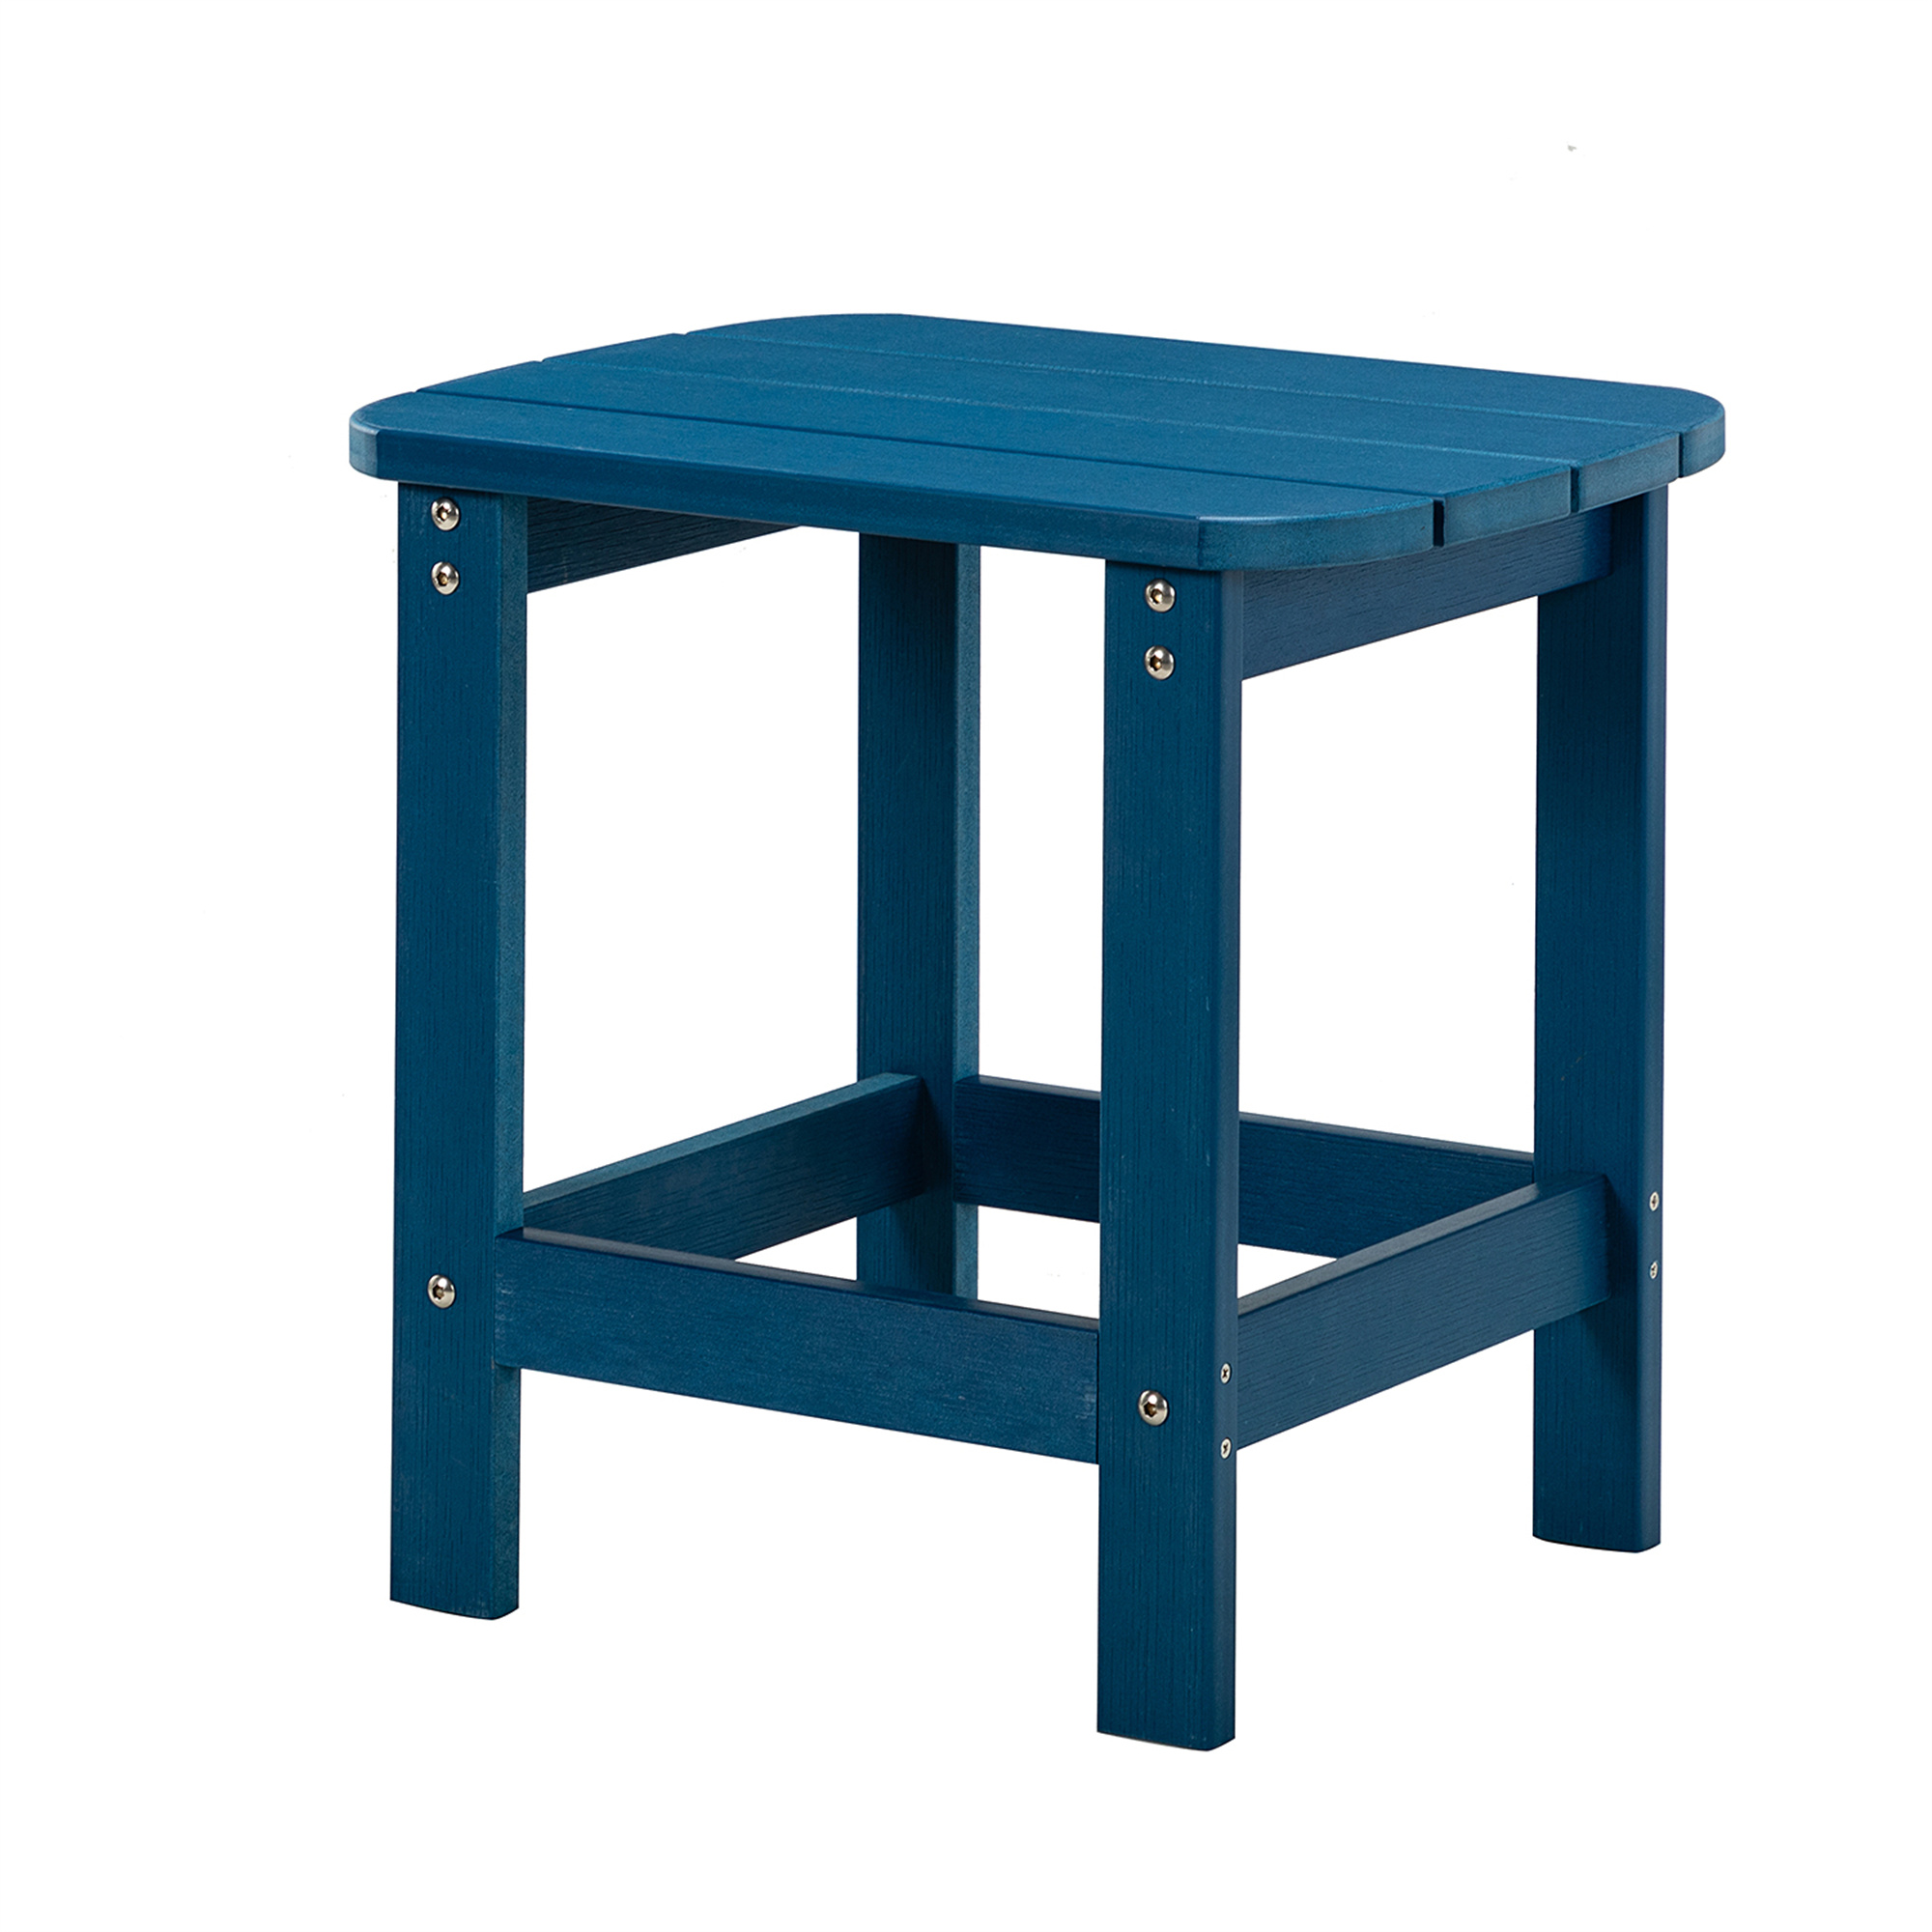 Cfowner Square Outdoor Side Table, Pool Composite Patio Table, End Tables for Backyard, Easy Maintenance, Navy - image 2 of 7